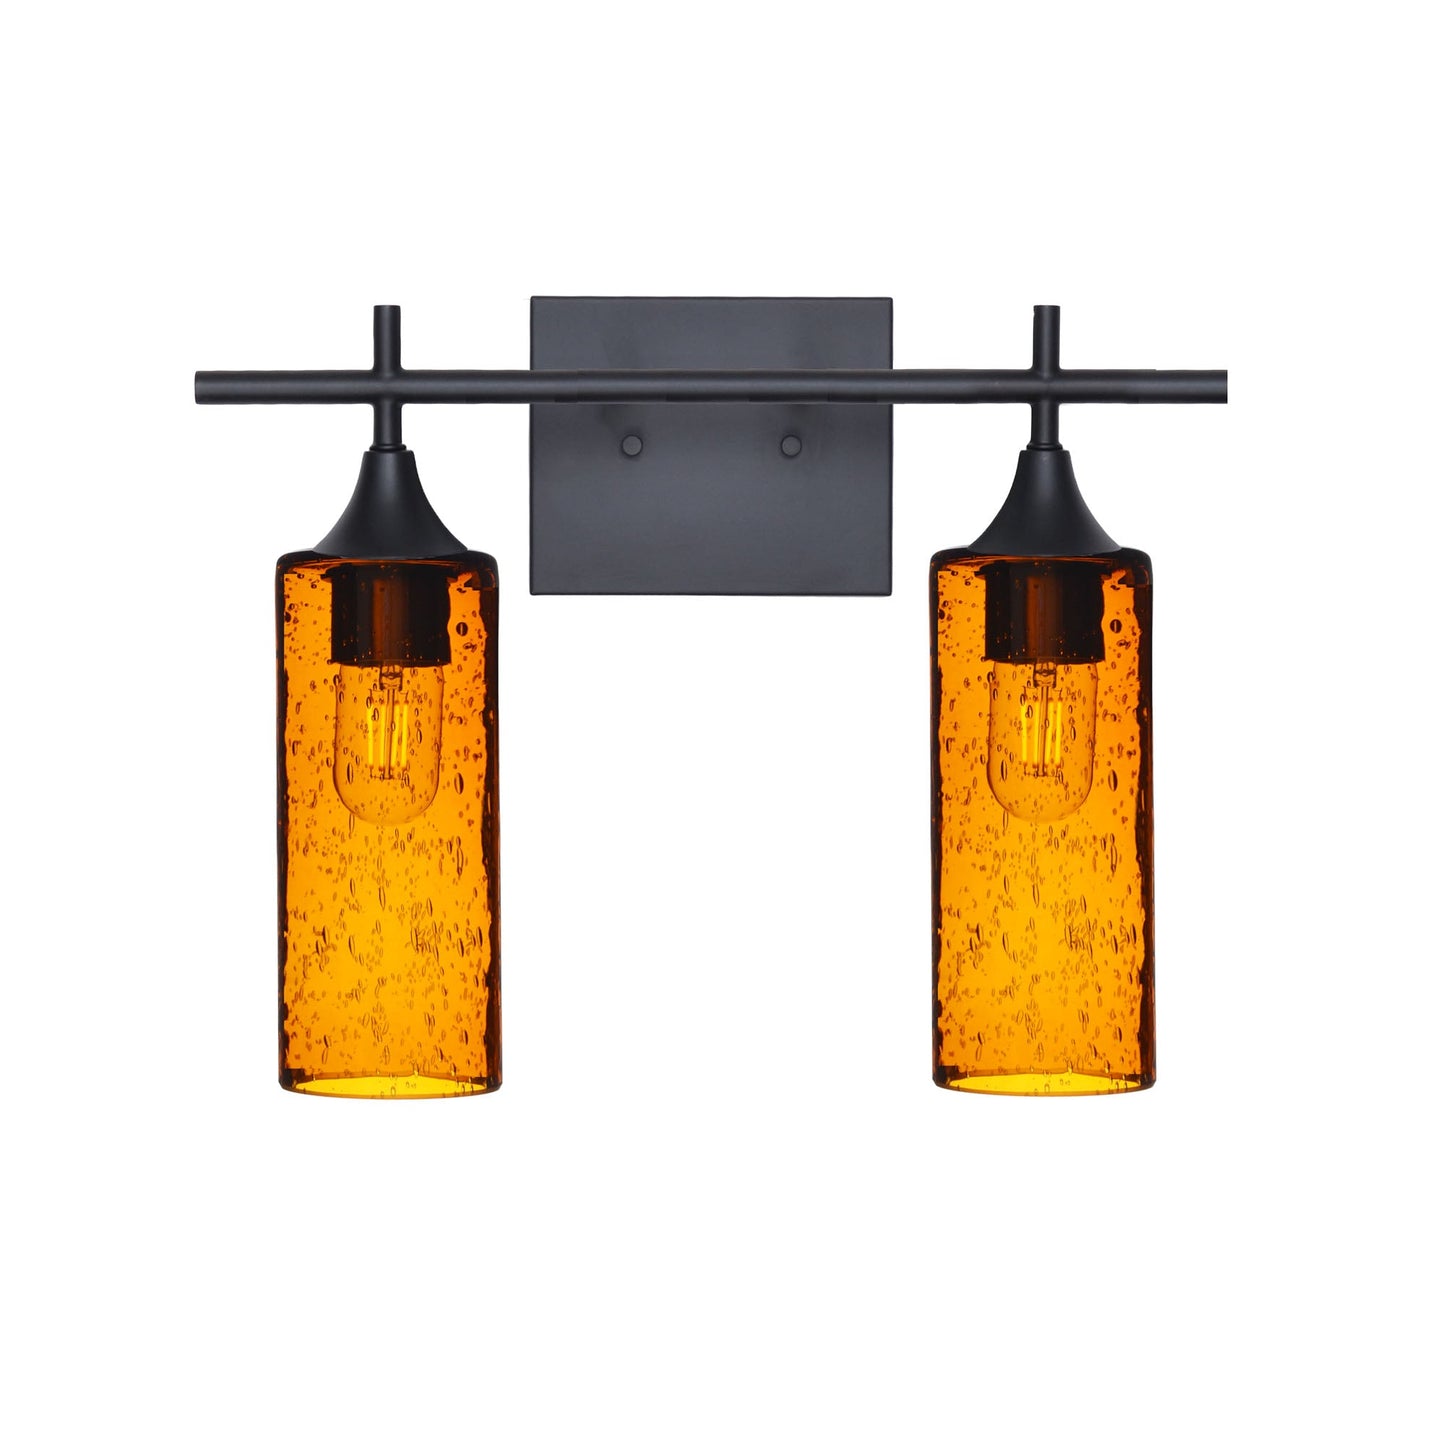 513 Lunar: 2 Light Wall Vanity-Glass-Bicycle Glass Co - Hotshop-Golden Amber-Matte Black-Bicycle Glass Co